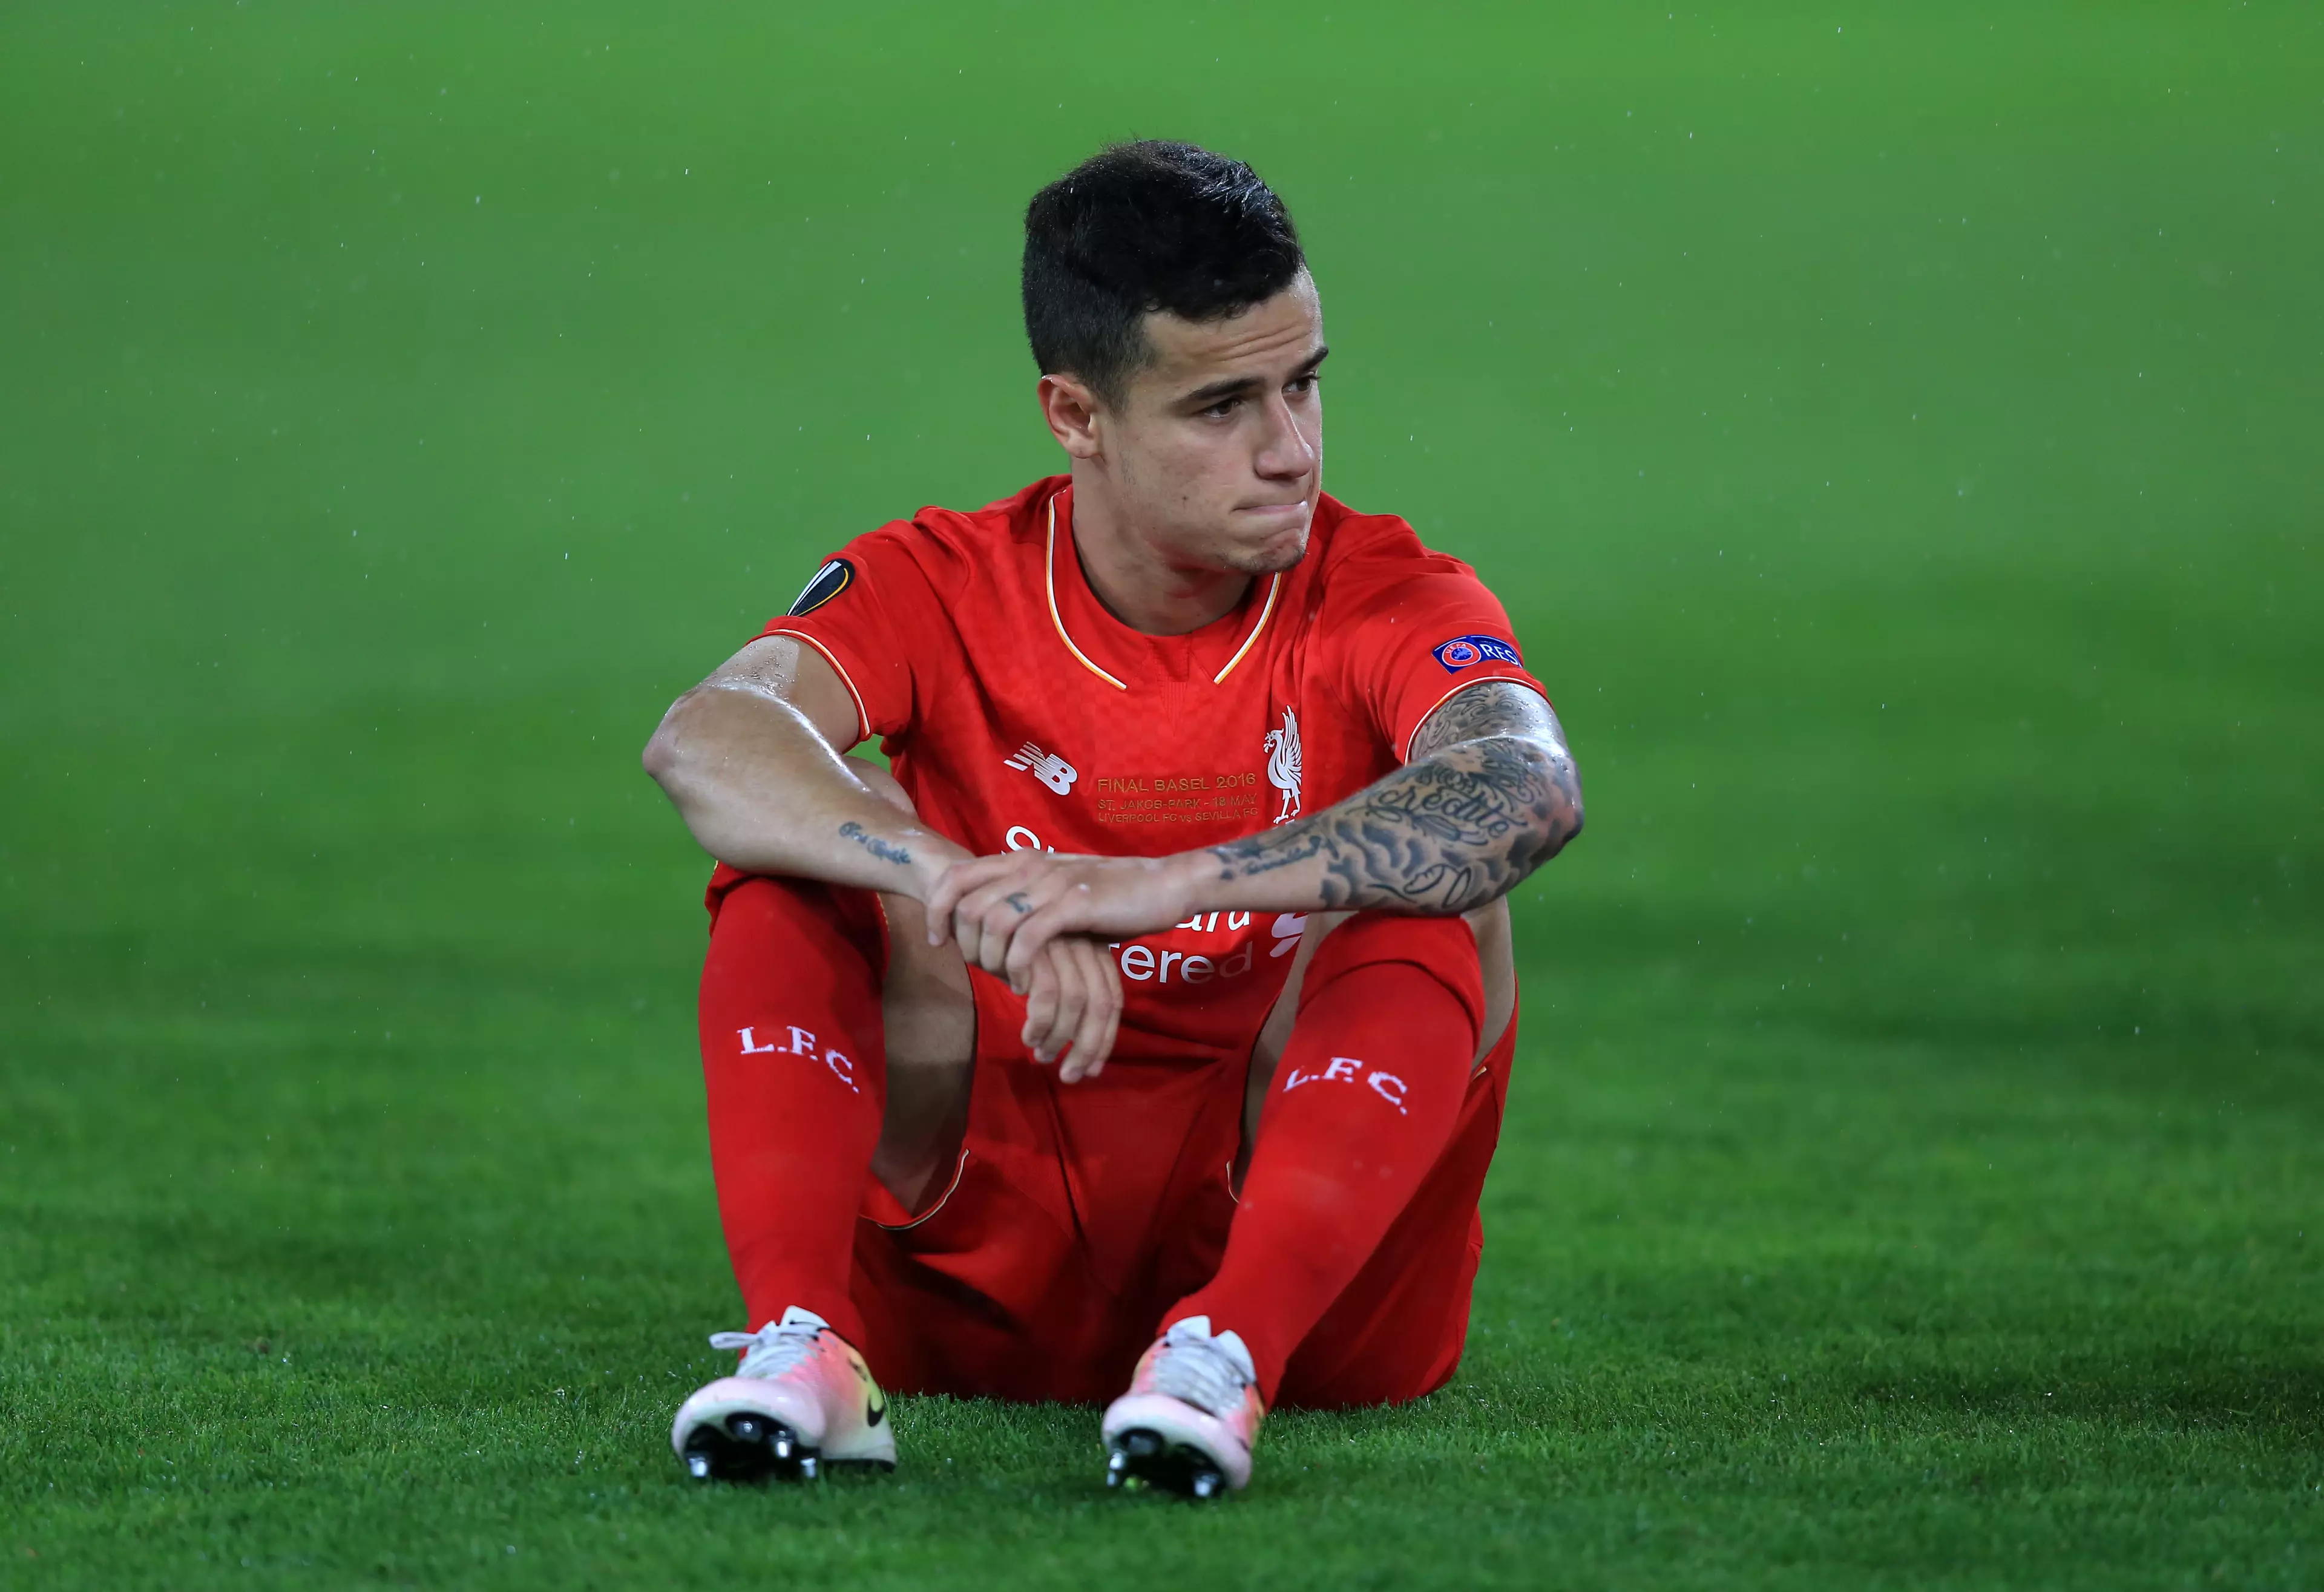 Coutinho was left frustrated in the summer despite his transfer request. Image: PA Images.